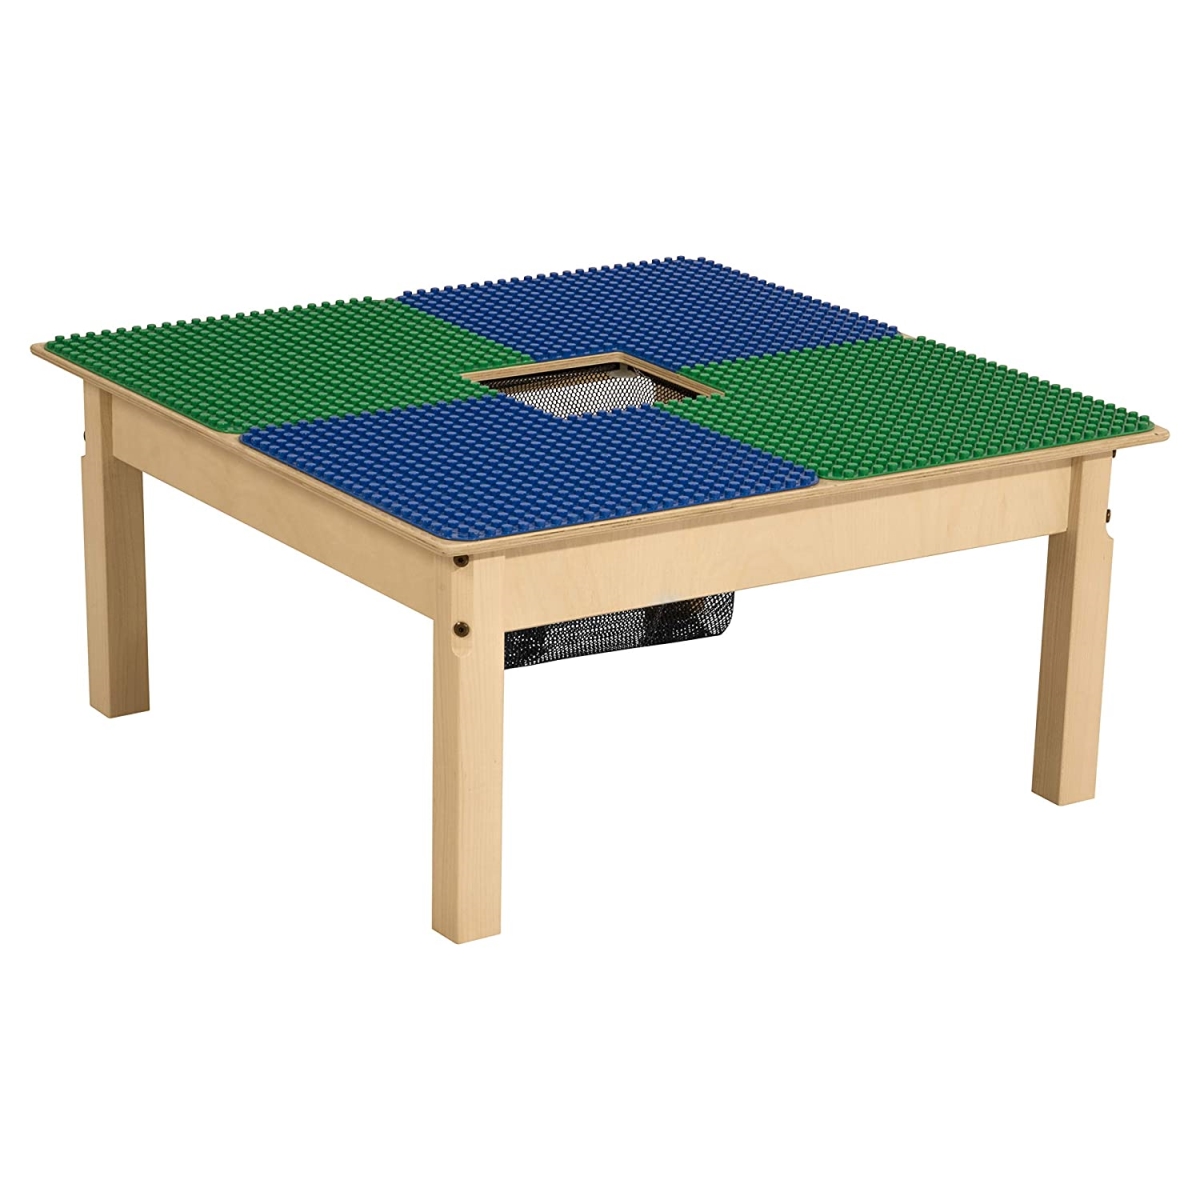 Tp3131pgna1217-bg 12-17 In. Duplo Compatible Table With Adjustable Legs, Blue & Green - Square